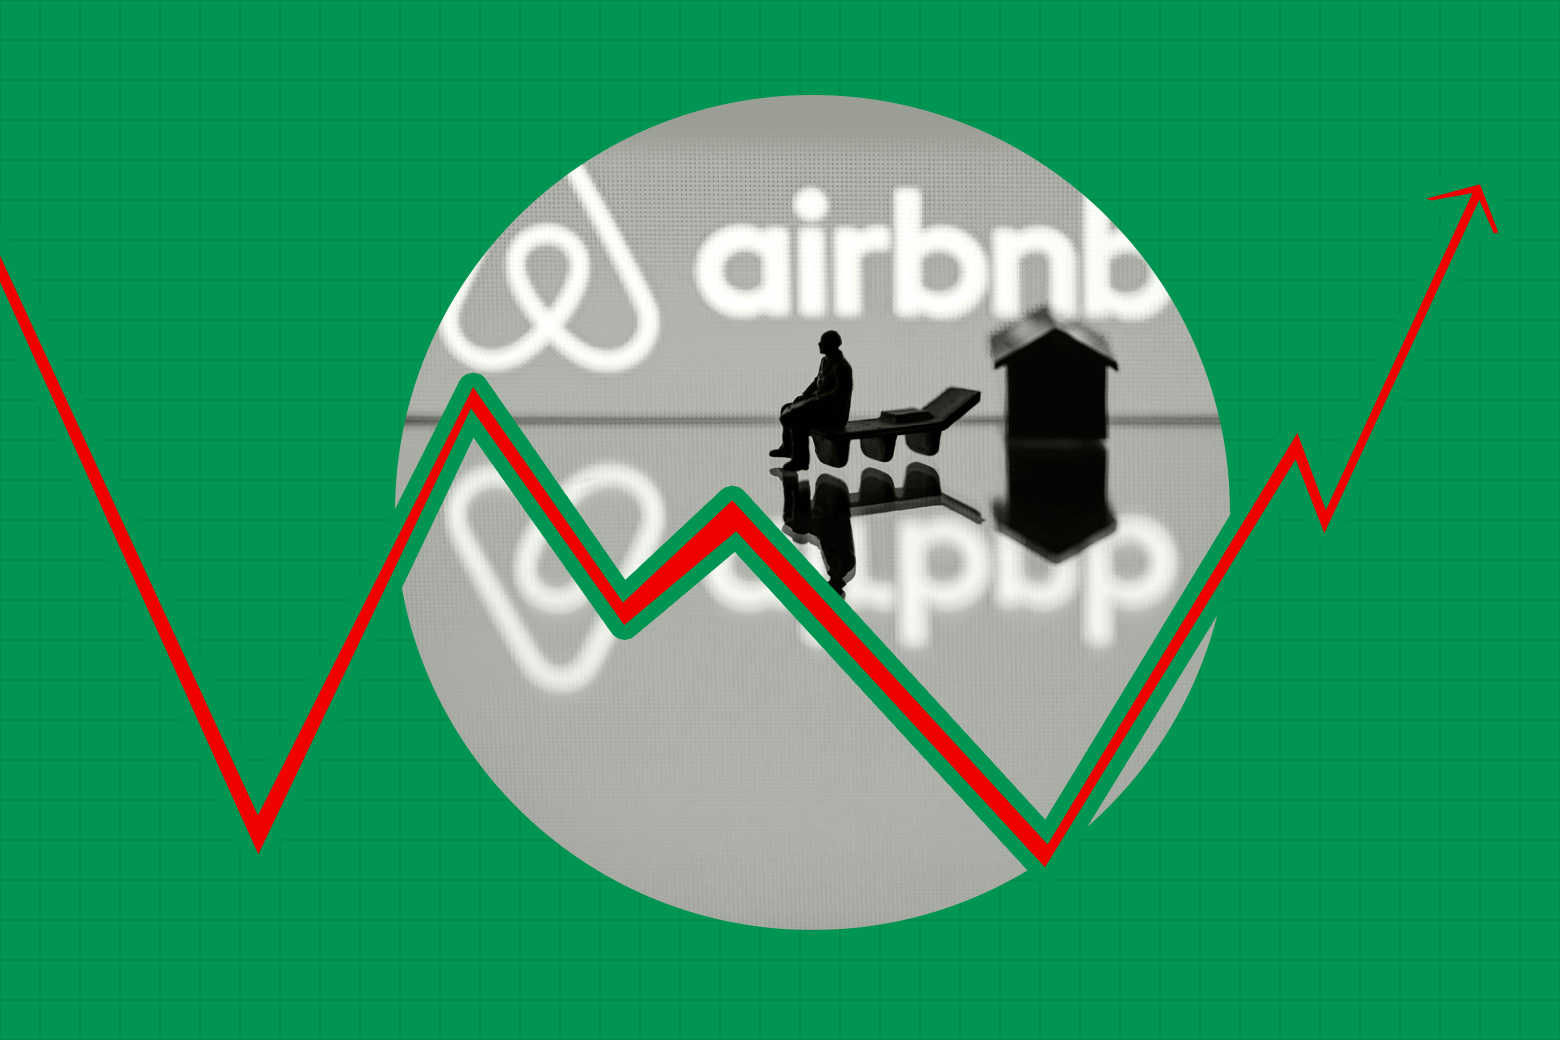 A figurine and a toy house in front of the Airbnb logo